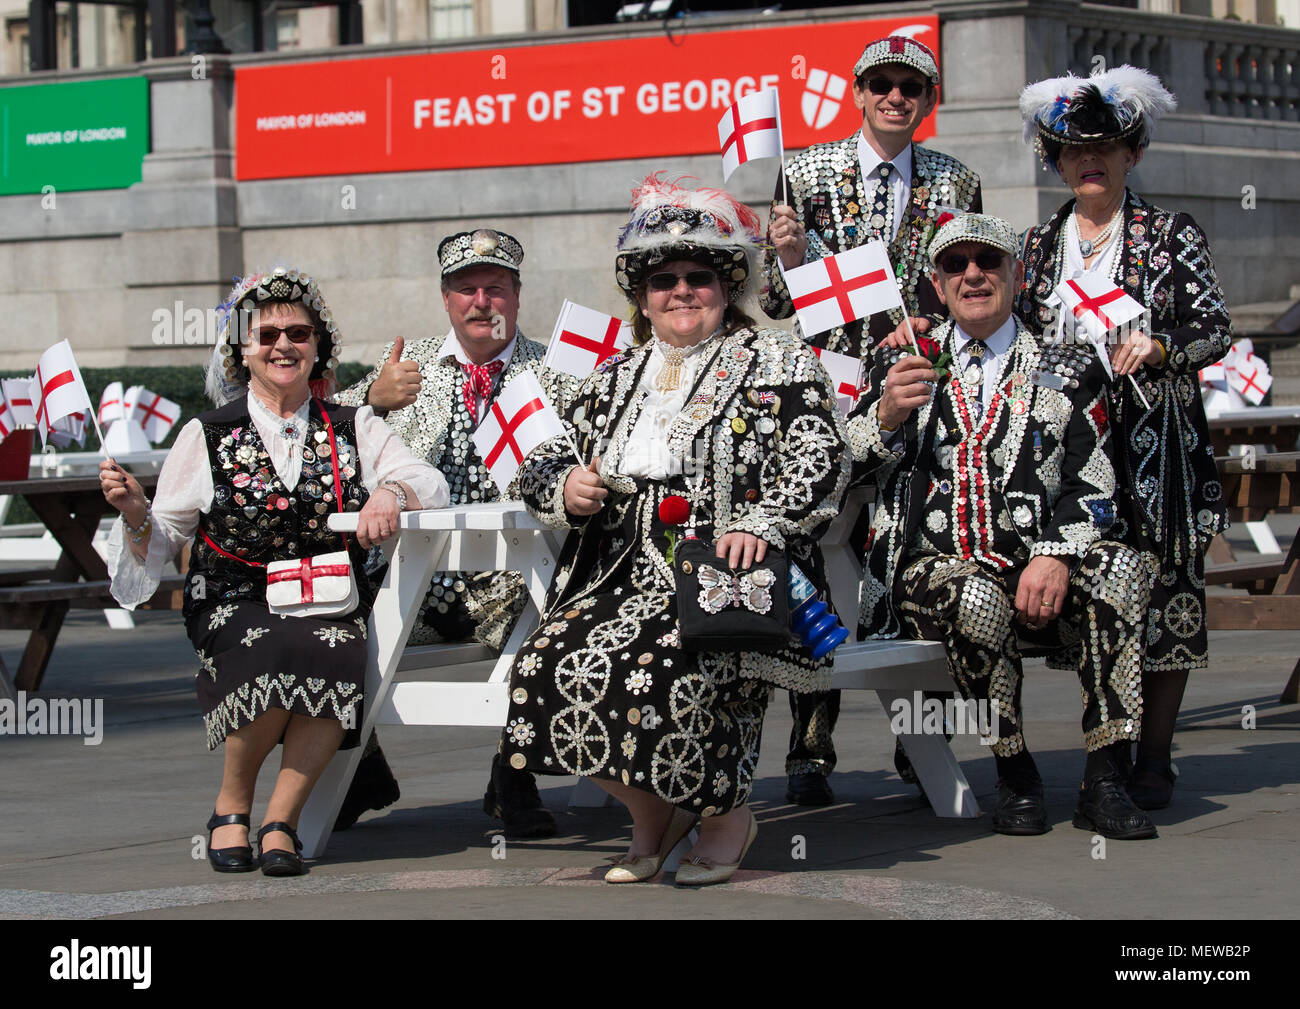 Pearly Kings and Queens in Trafalgar Square for the Feast of St George to celebrate St George's Day, the Patron Saint of England which is on April 23r. Stock Photo